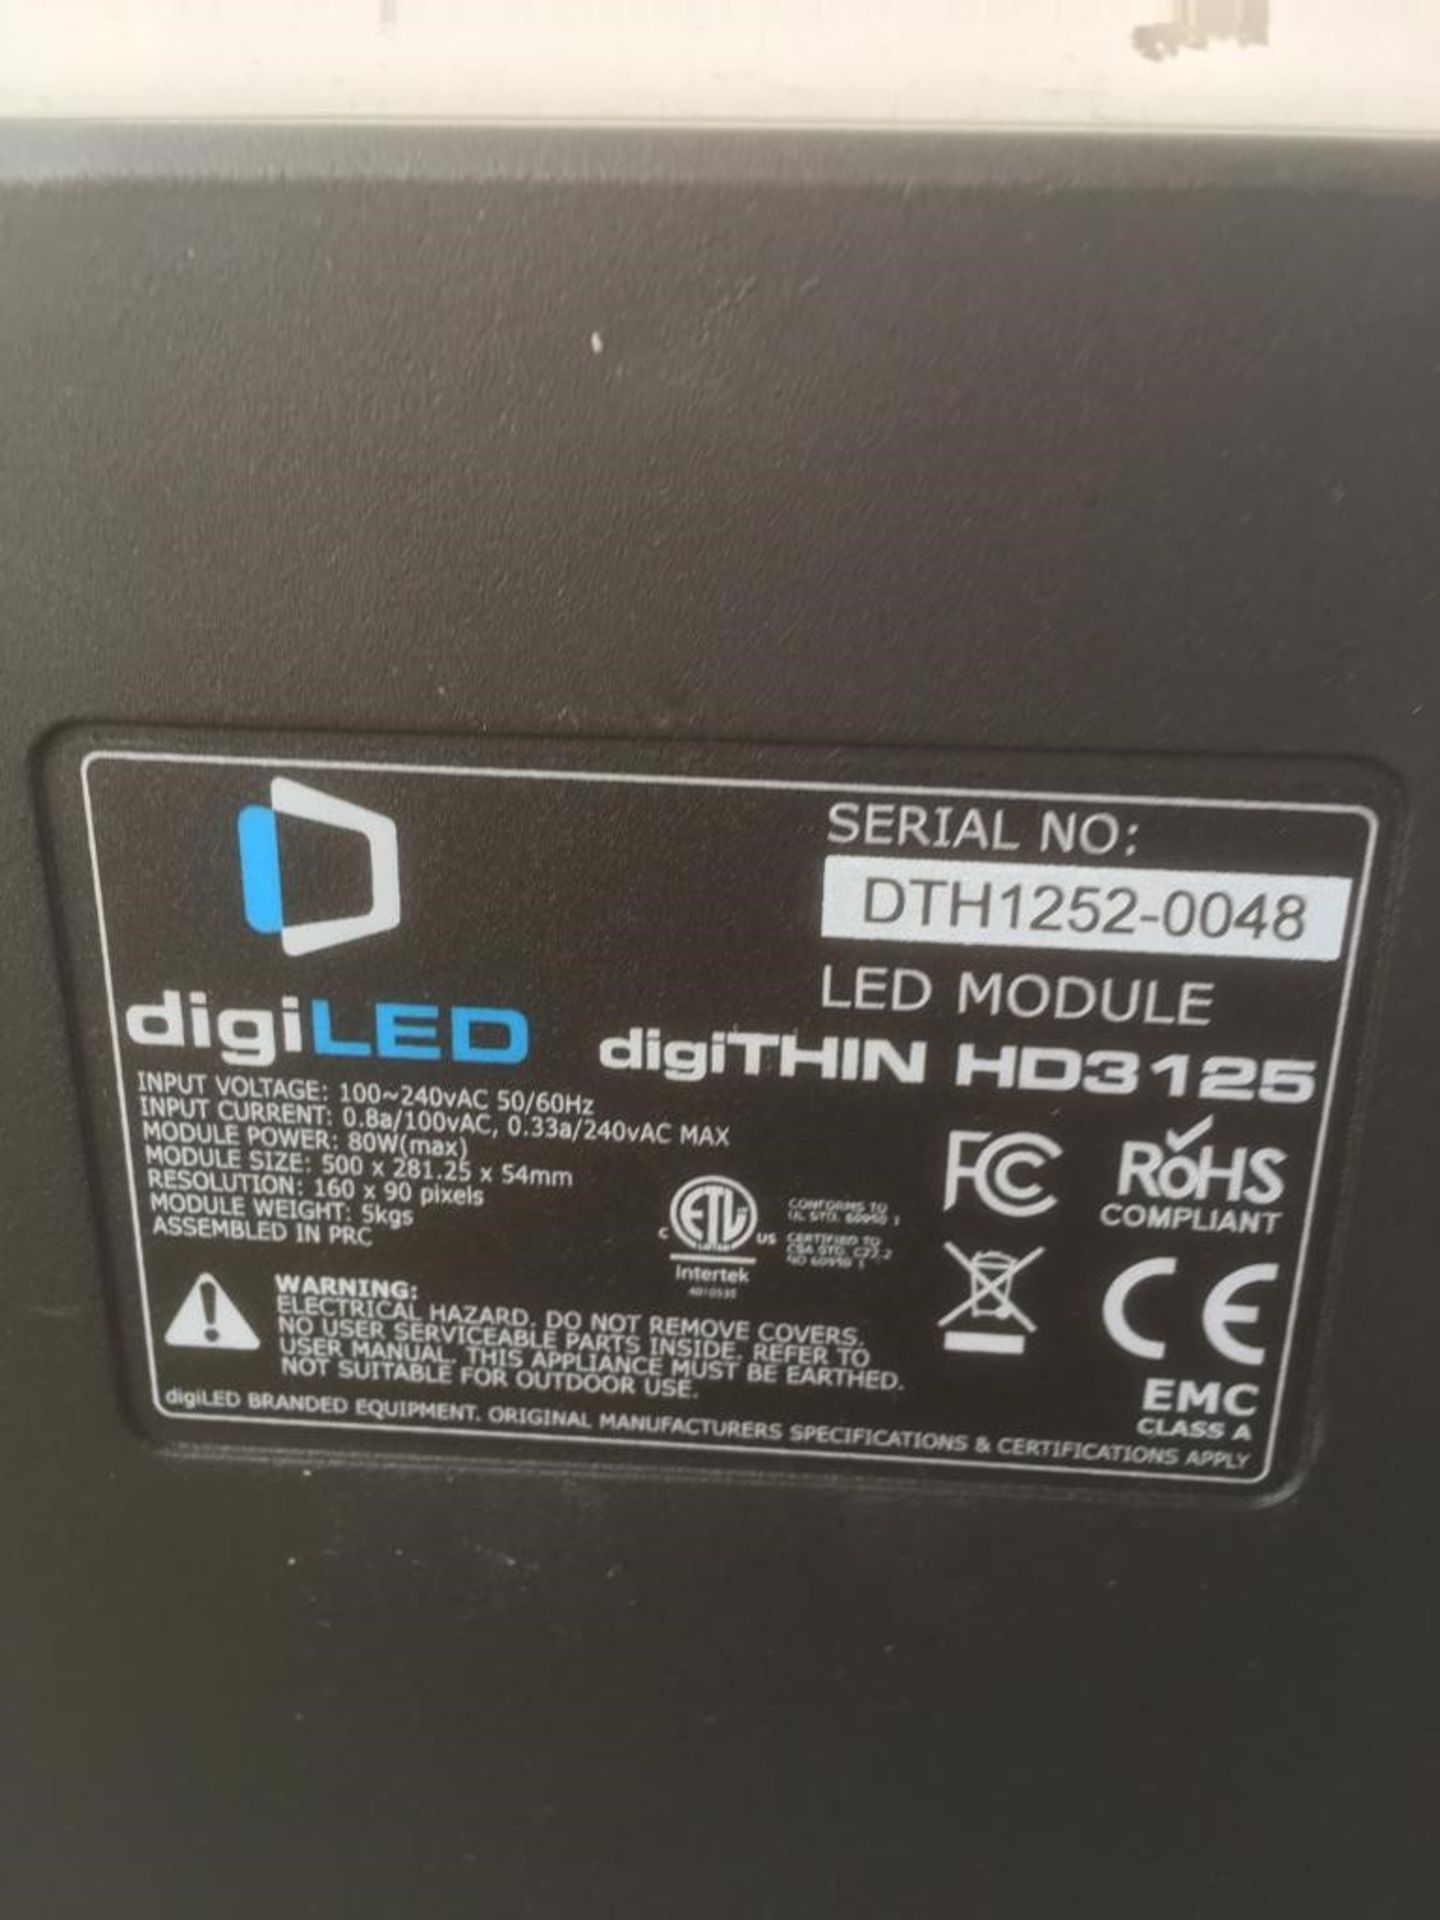 digiLED digiTHIN HD 3125 16 Module (4x4) Indoor LED HD screen - Image 3 of 5